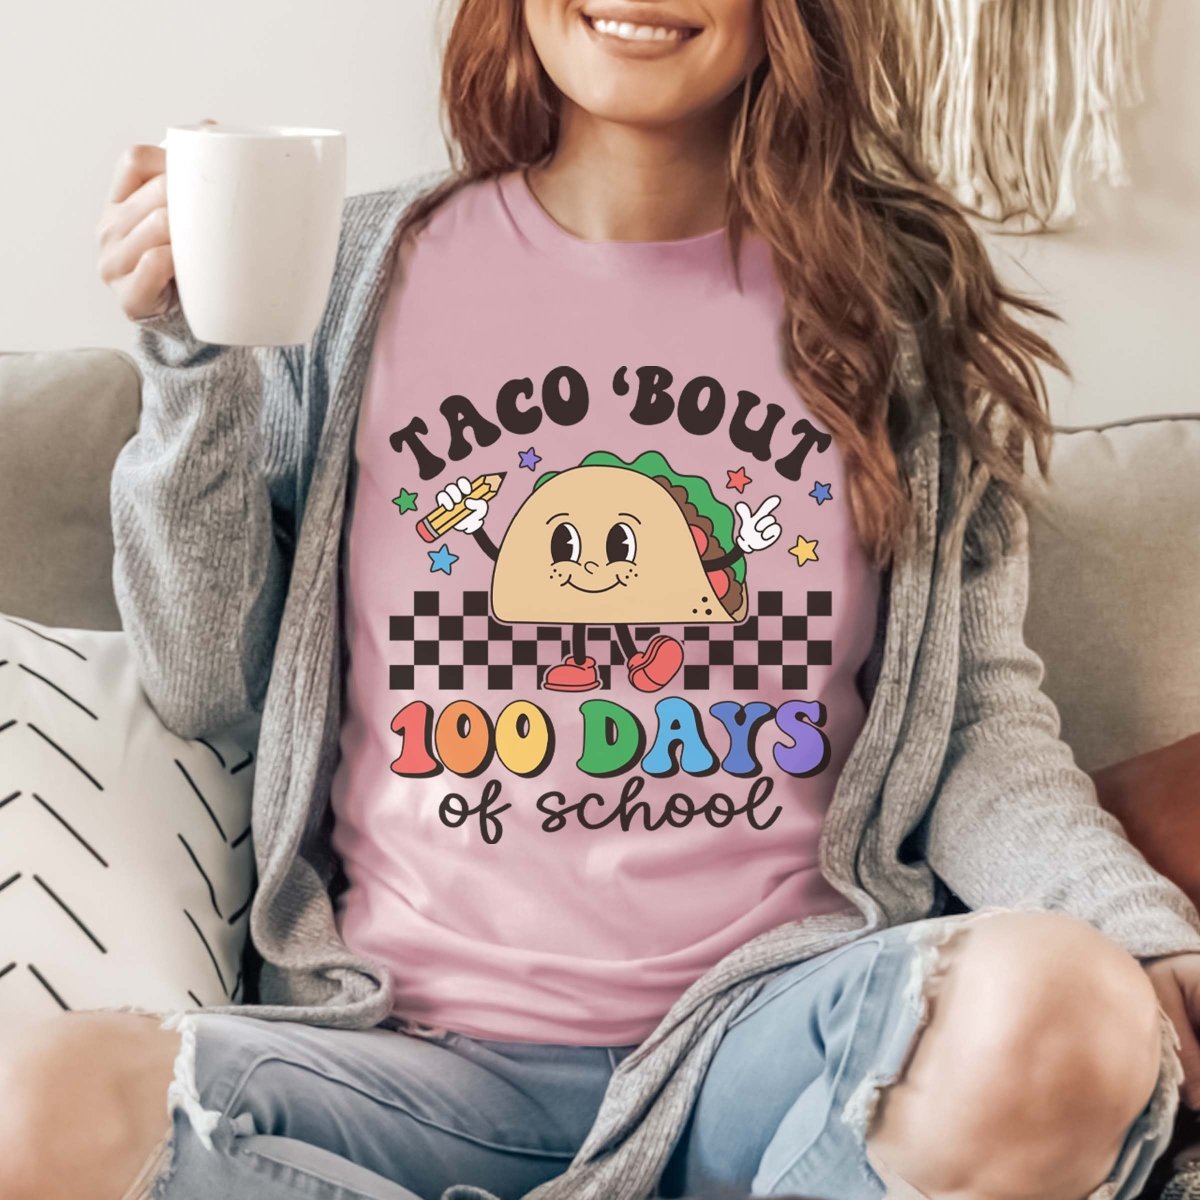 Let's Taco About 100 Days Wholesale Tee - Limeberry Designs